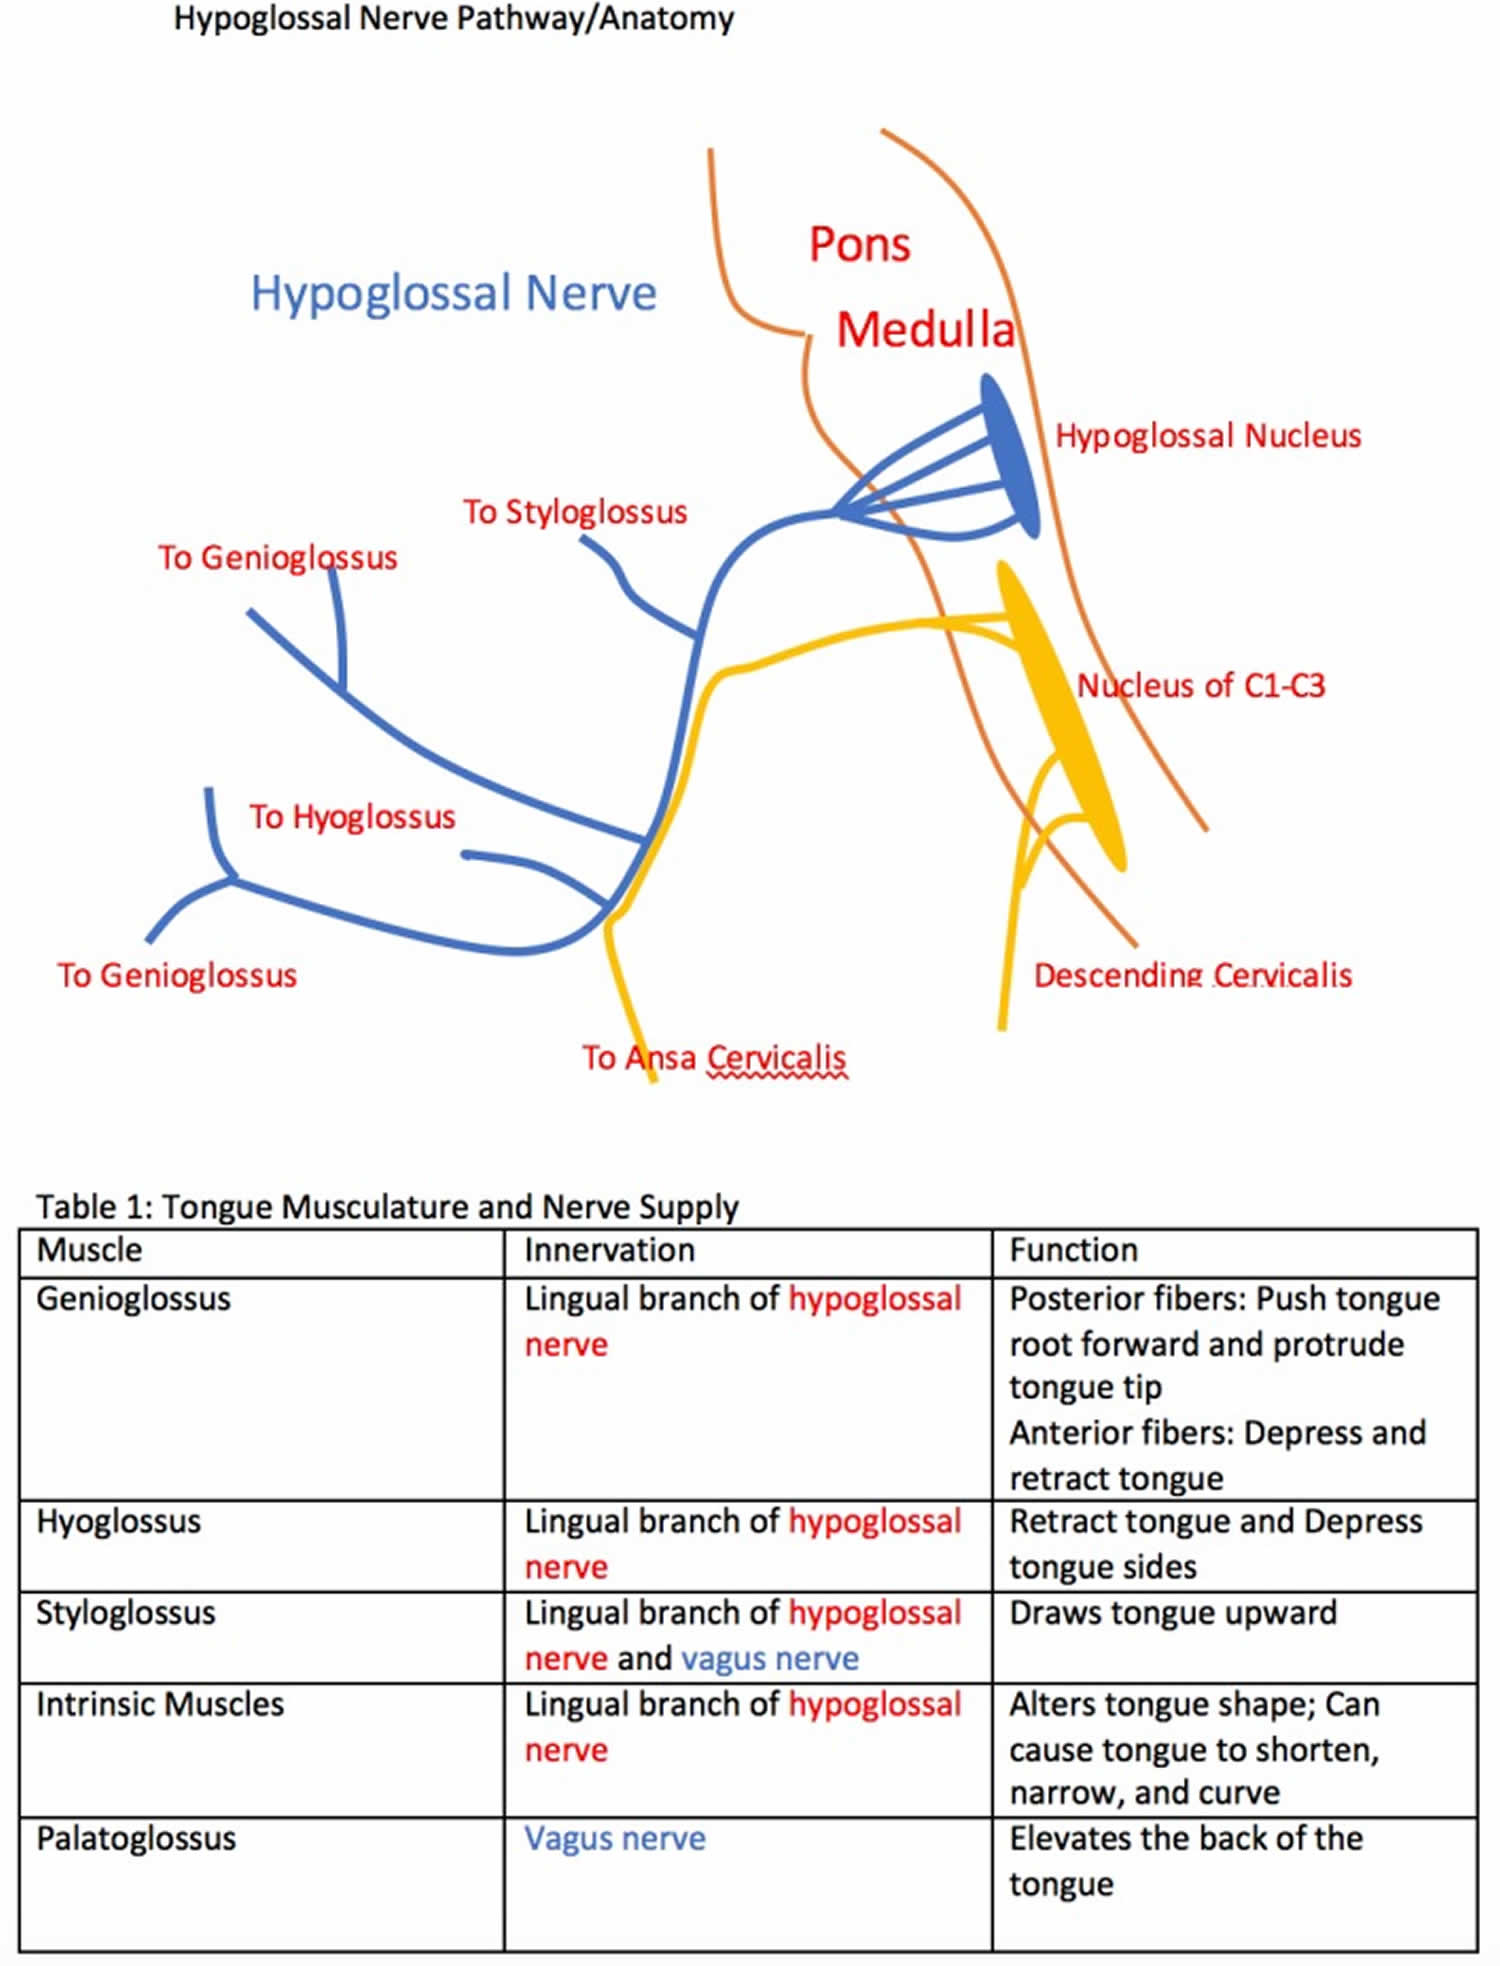 Hypoglossal nerve anatomy and function